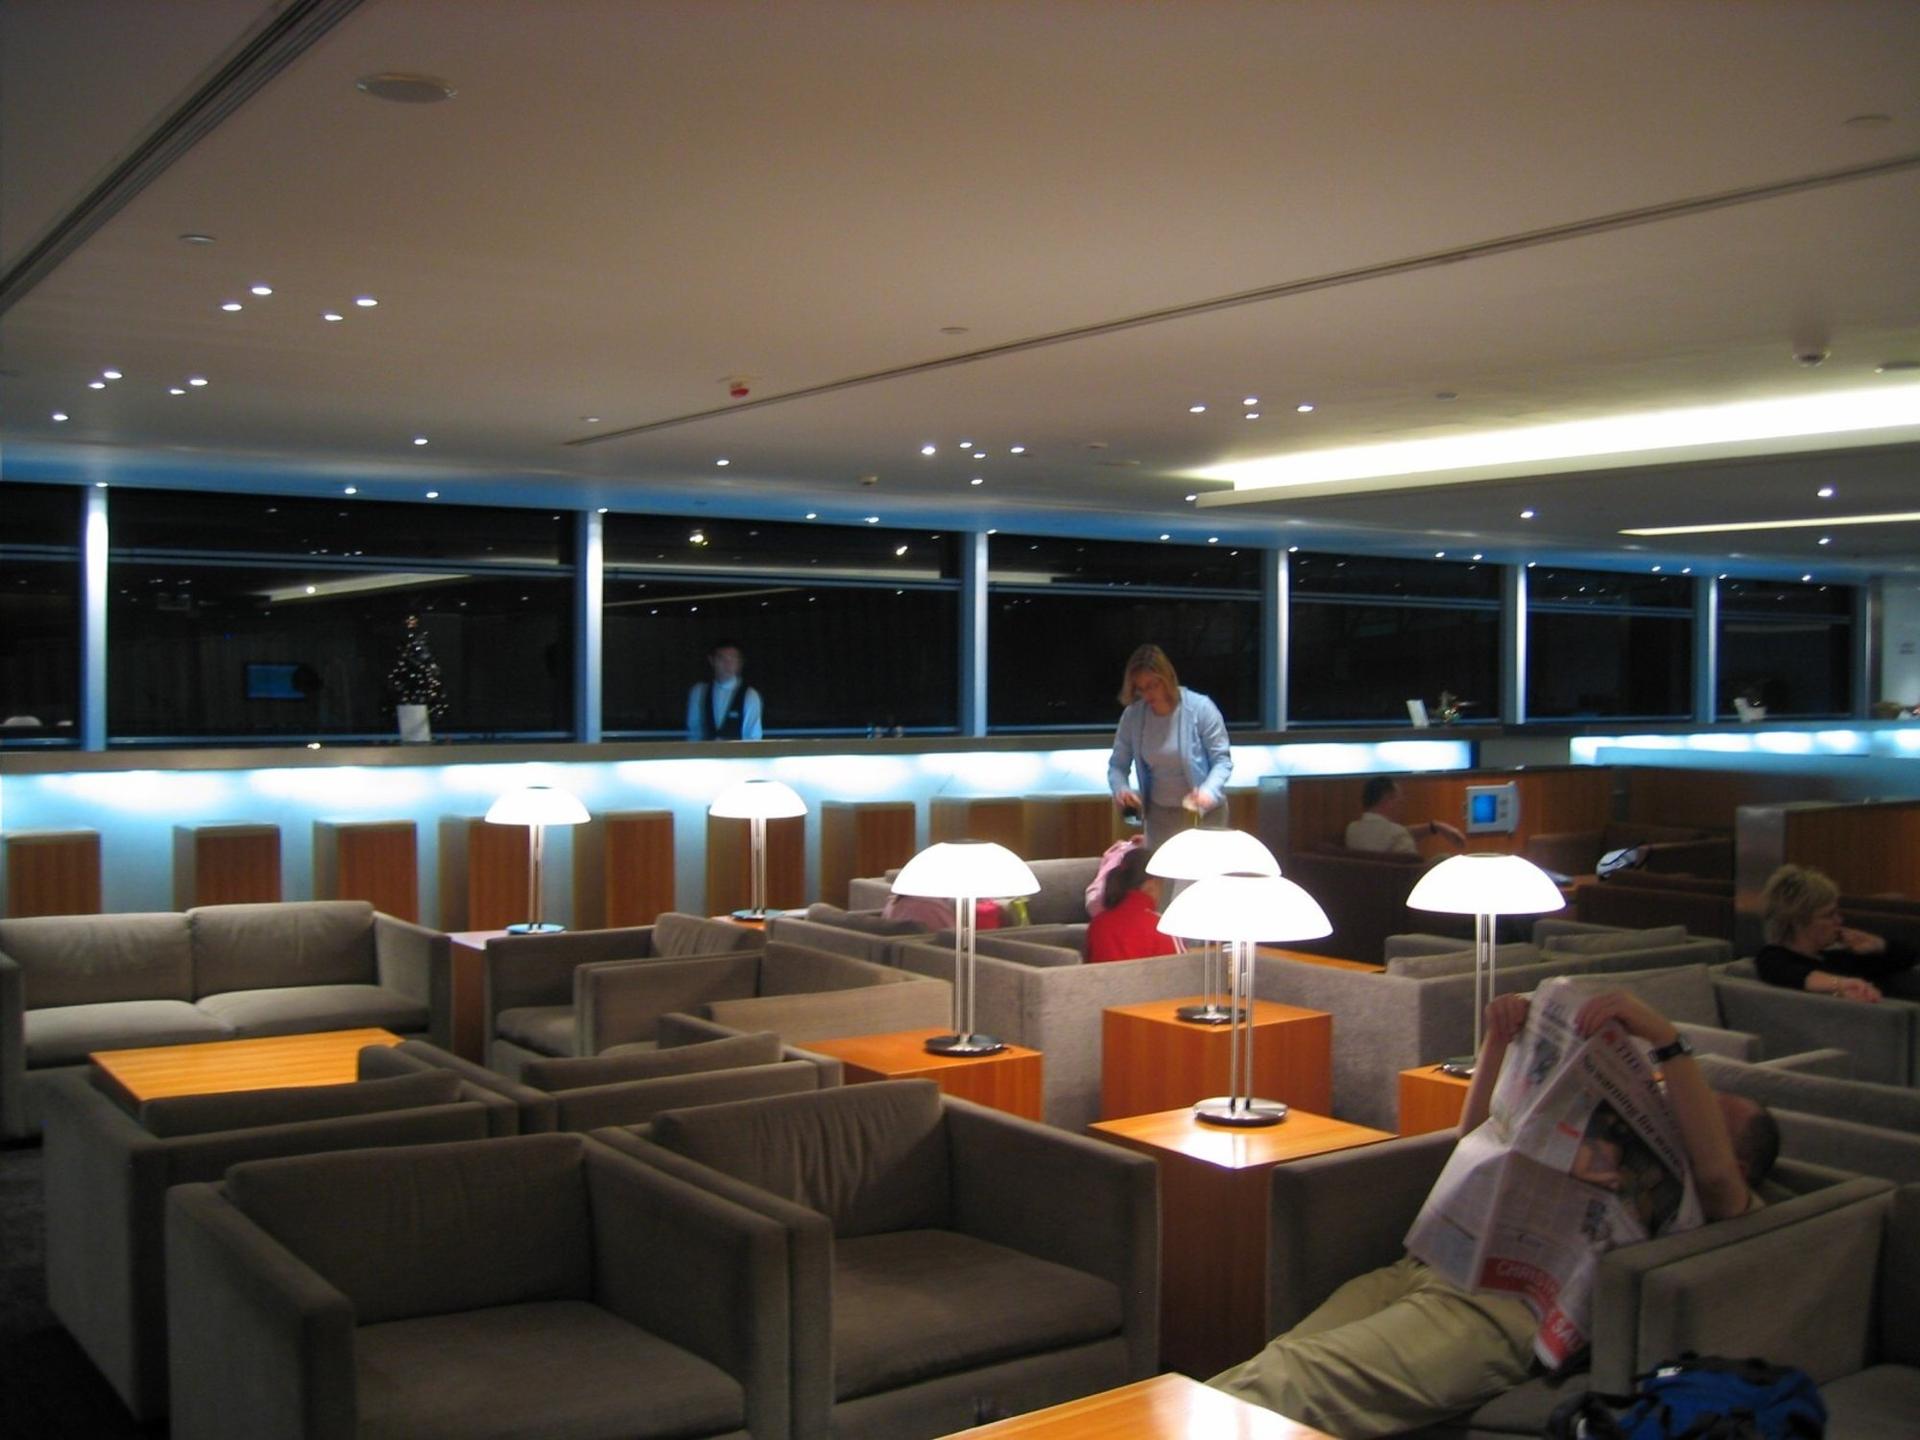 Cathay Pacific The Wing Business Class Lounge image 48 of 55